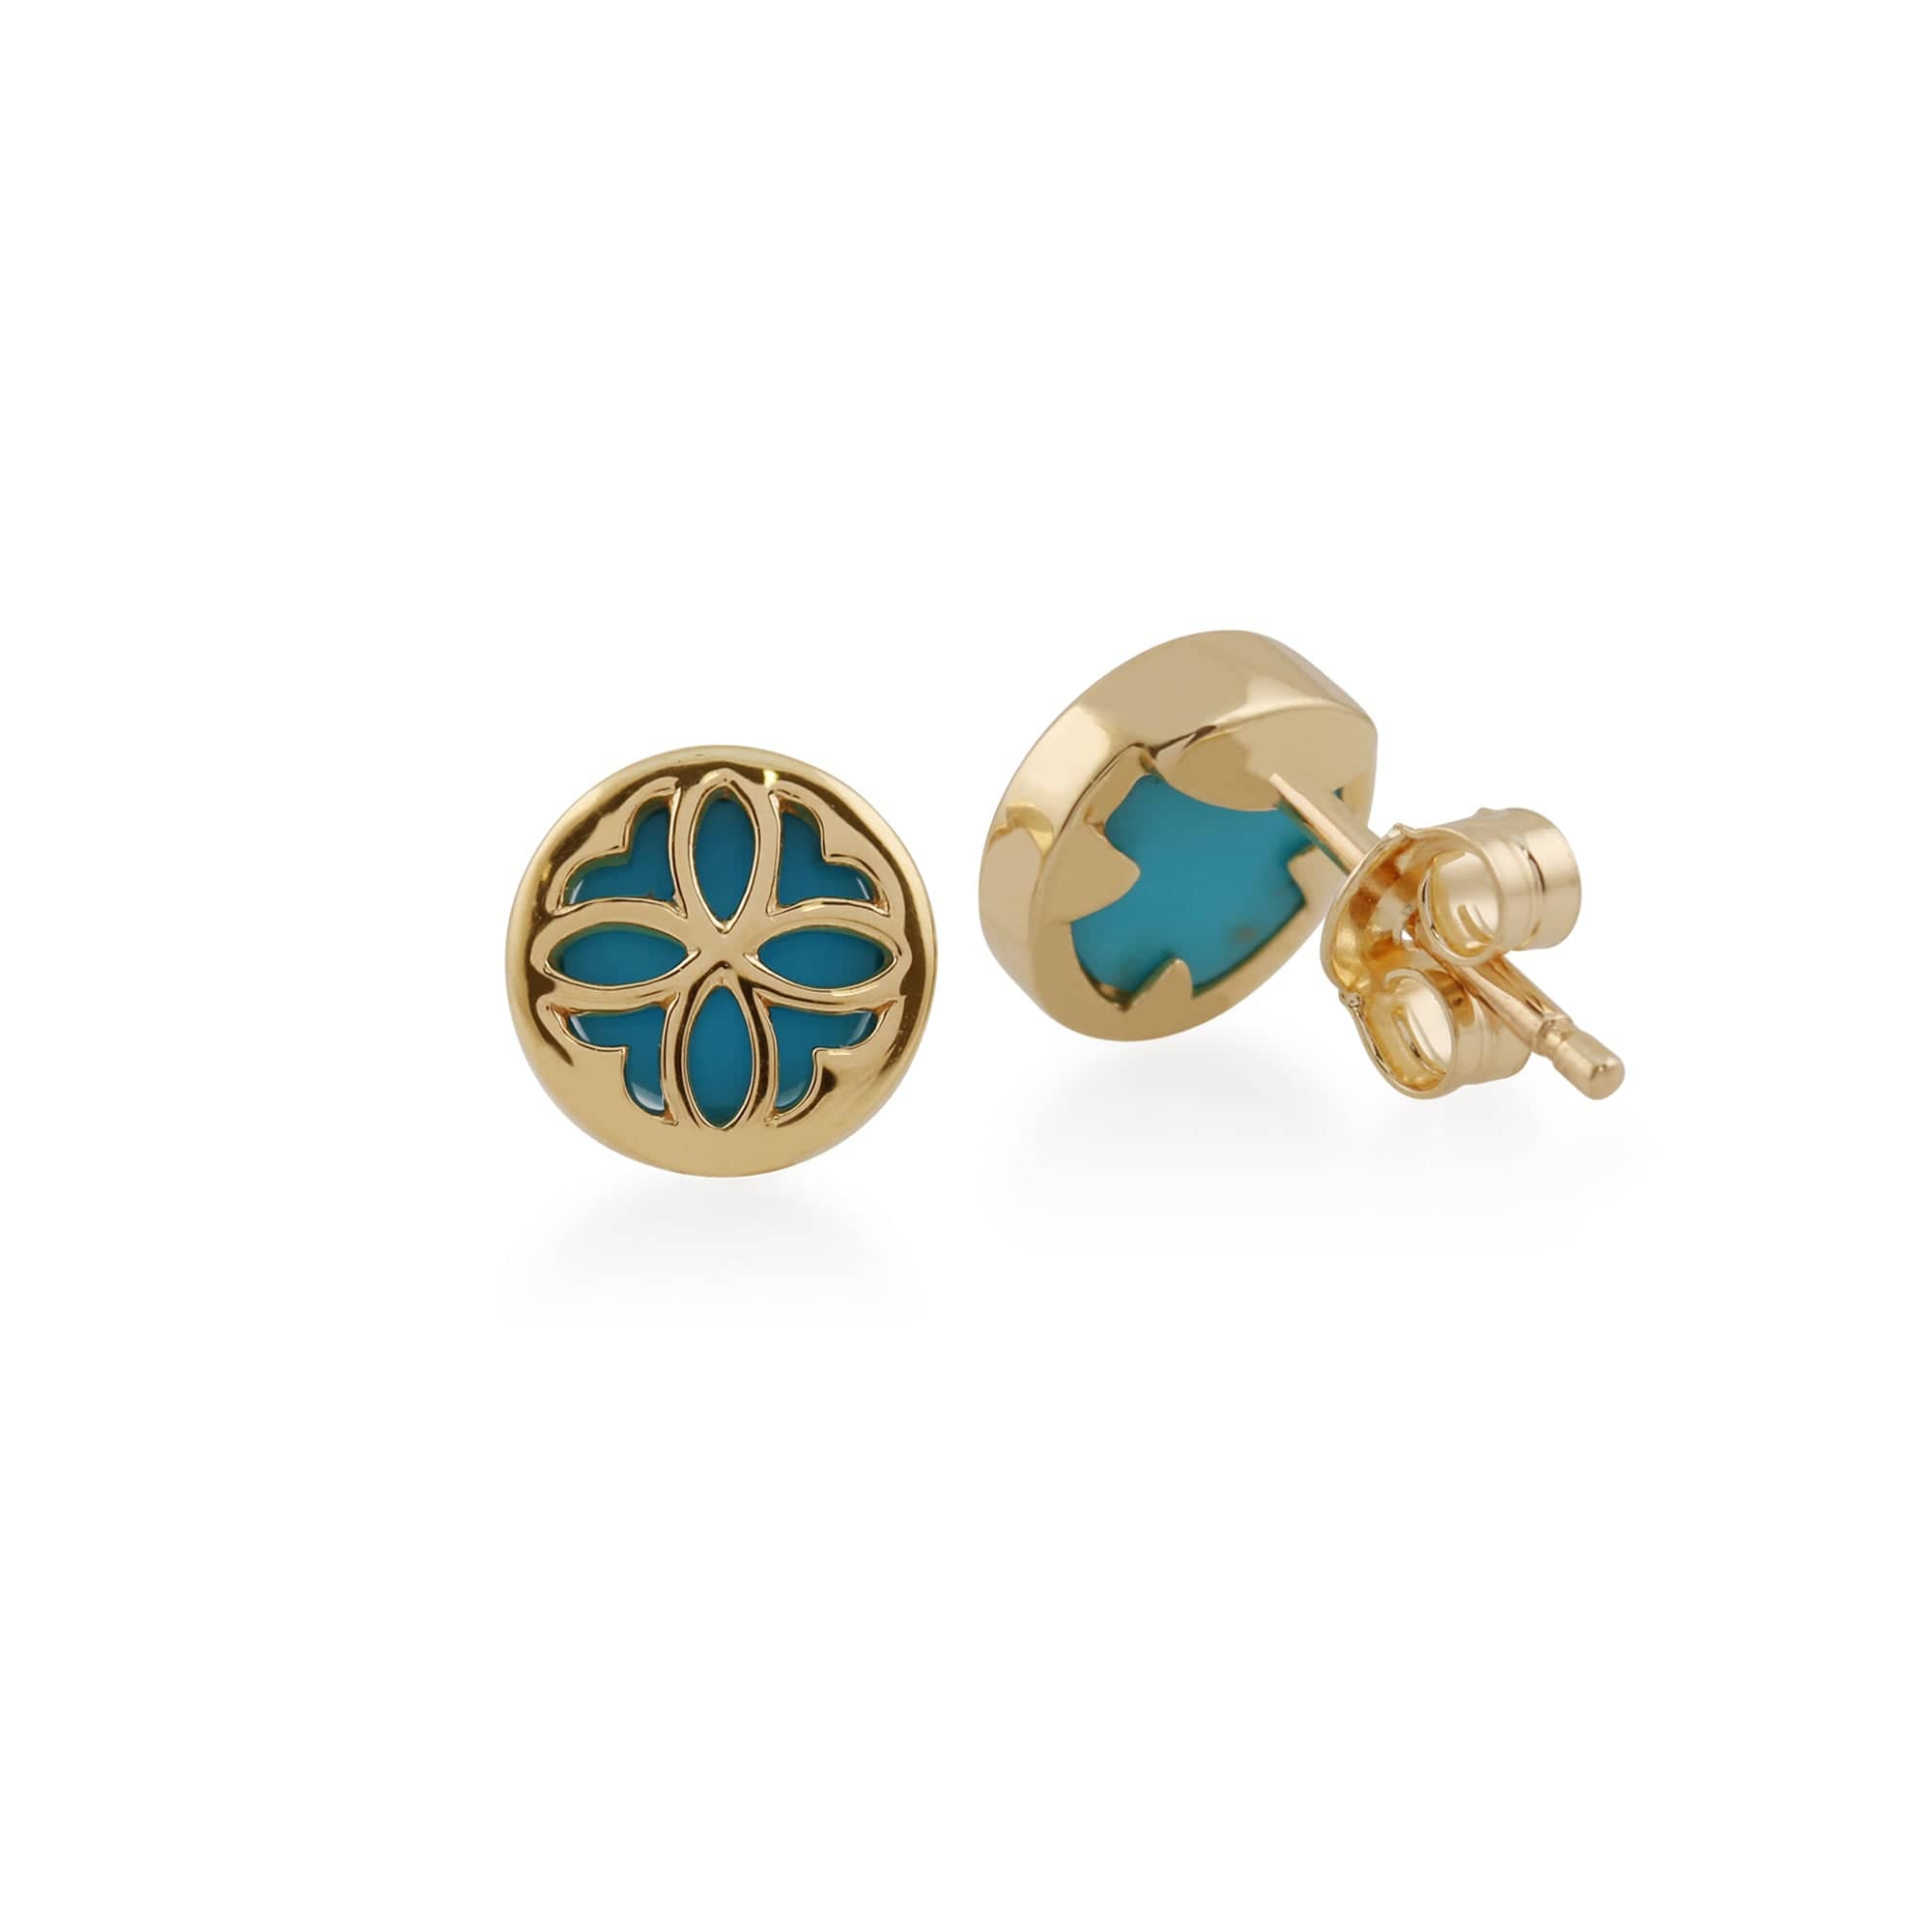 135E1320019 Art Nouveau Style Round Turquoise Floral Pattern Overlay Stud Earrings in 9ct Yellow Gold 3